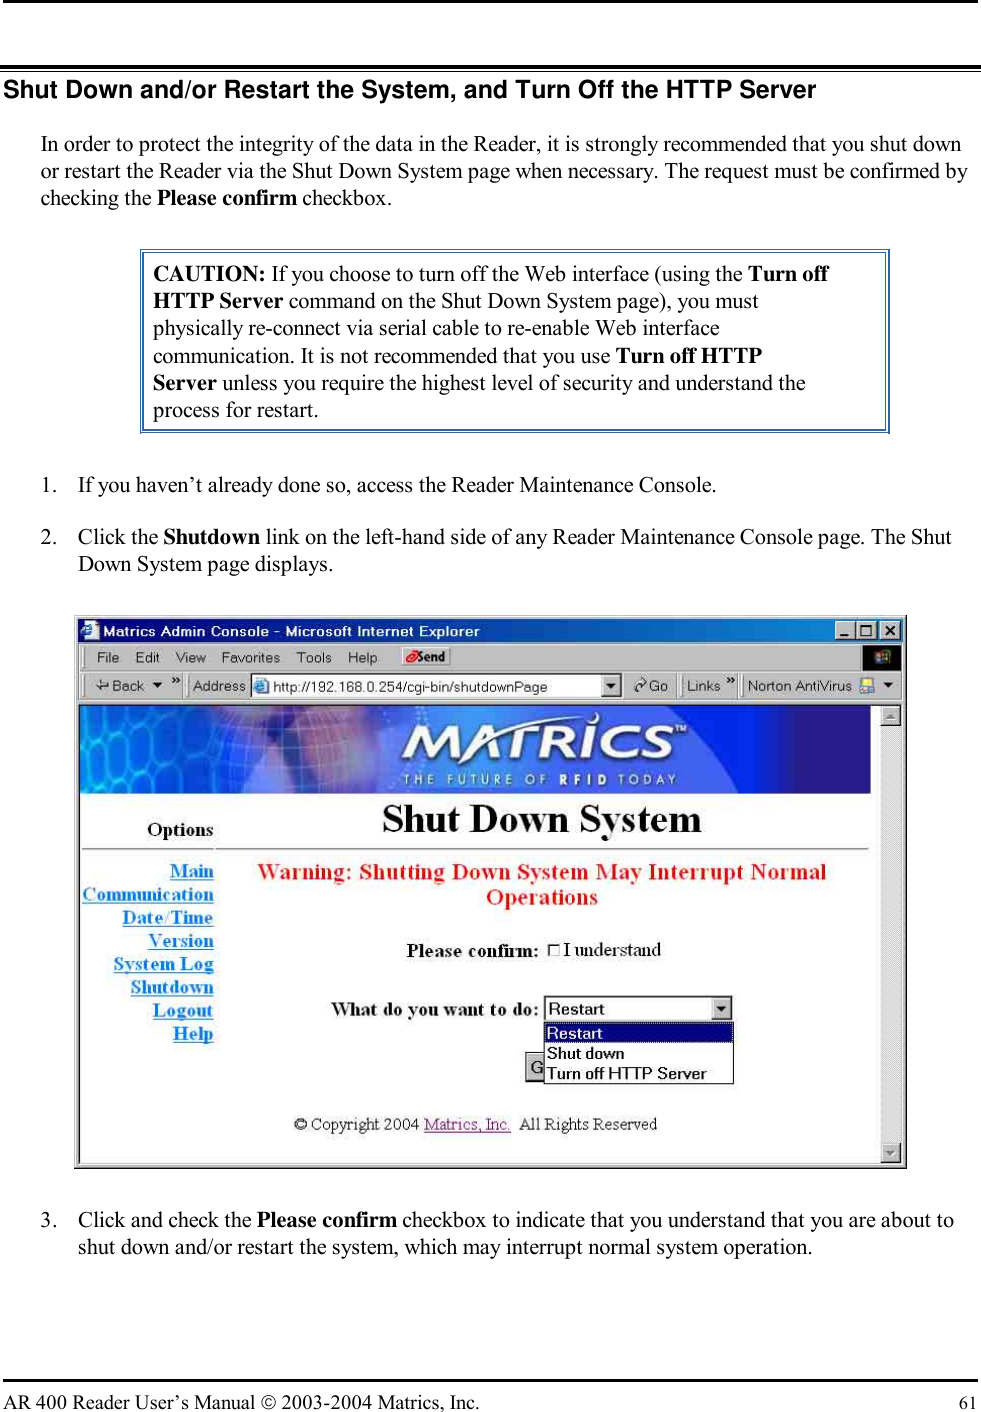   AR 400 Reader User’s Manual  2003-2004 Matrics, Inc.  61 Shut Down and/or Restart the System, and Turn Off the HTTP Server In order to protect the integrity of the data in the Reader, it is strongly recommended that you shut down or restart the Reader via the Shut Down System page when necessary. The request must be confirmed by checking the Please confirm checkbox.  CAUTION: If you choose to turn off the Web interface (using the Turn off HTTP Server command on the Shut Down System page), you must physically re-connect via serial cable to re-enable Web interface communication. It is not recommended that you use Turn off HTTP Server unless you require the highest level of security and understand the process for restart. 1.  If you haven’t already done so, access the Reader Maintenance Console. 2. Click the Shutdown link on the left-hand side of any Reader Maintenance Console page. The Shut Down System page displays.  3.  Click and check the Please confirm checkbox to indicate that you understand that you are about to shut down and/or restart the system, which may interrupt normal system operation. 